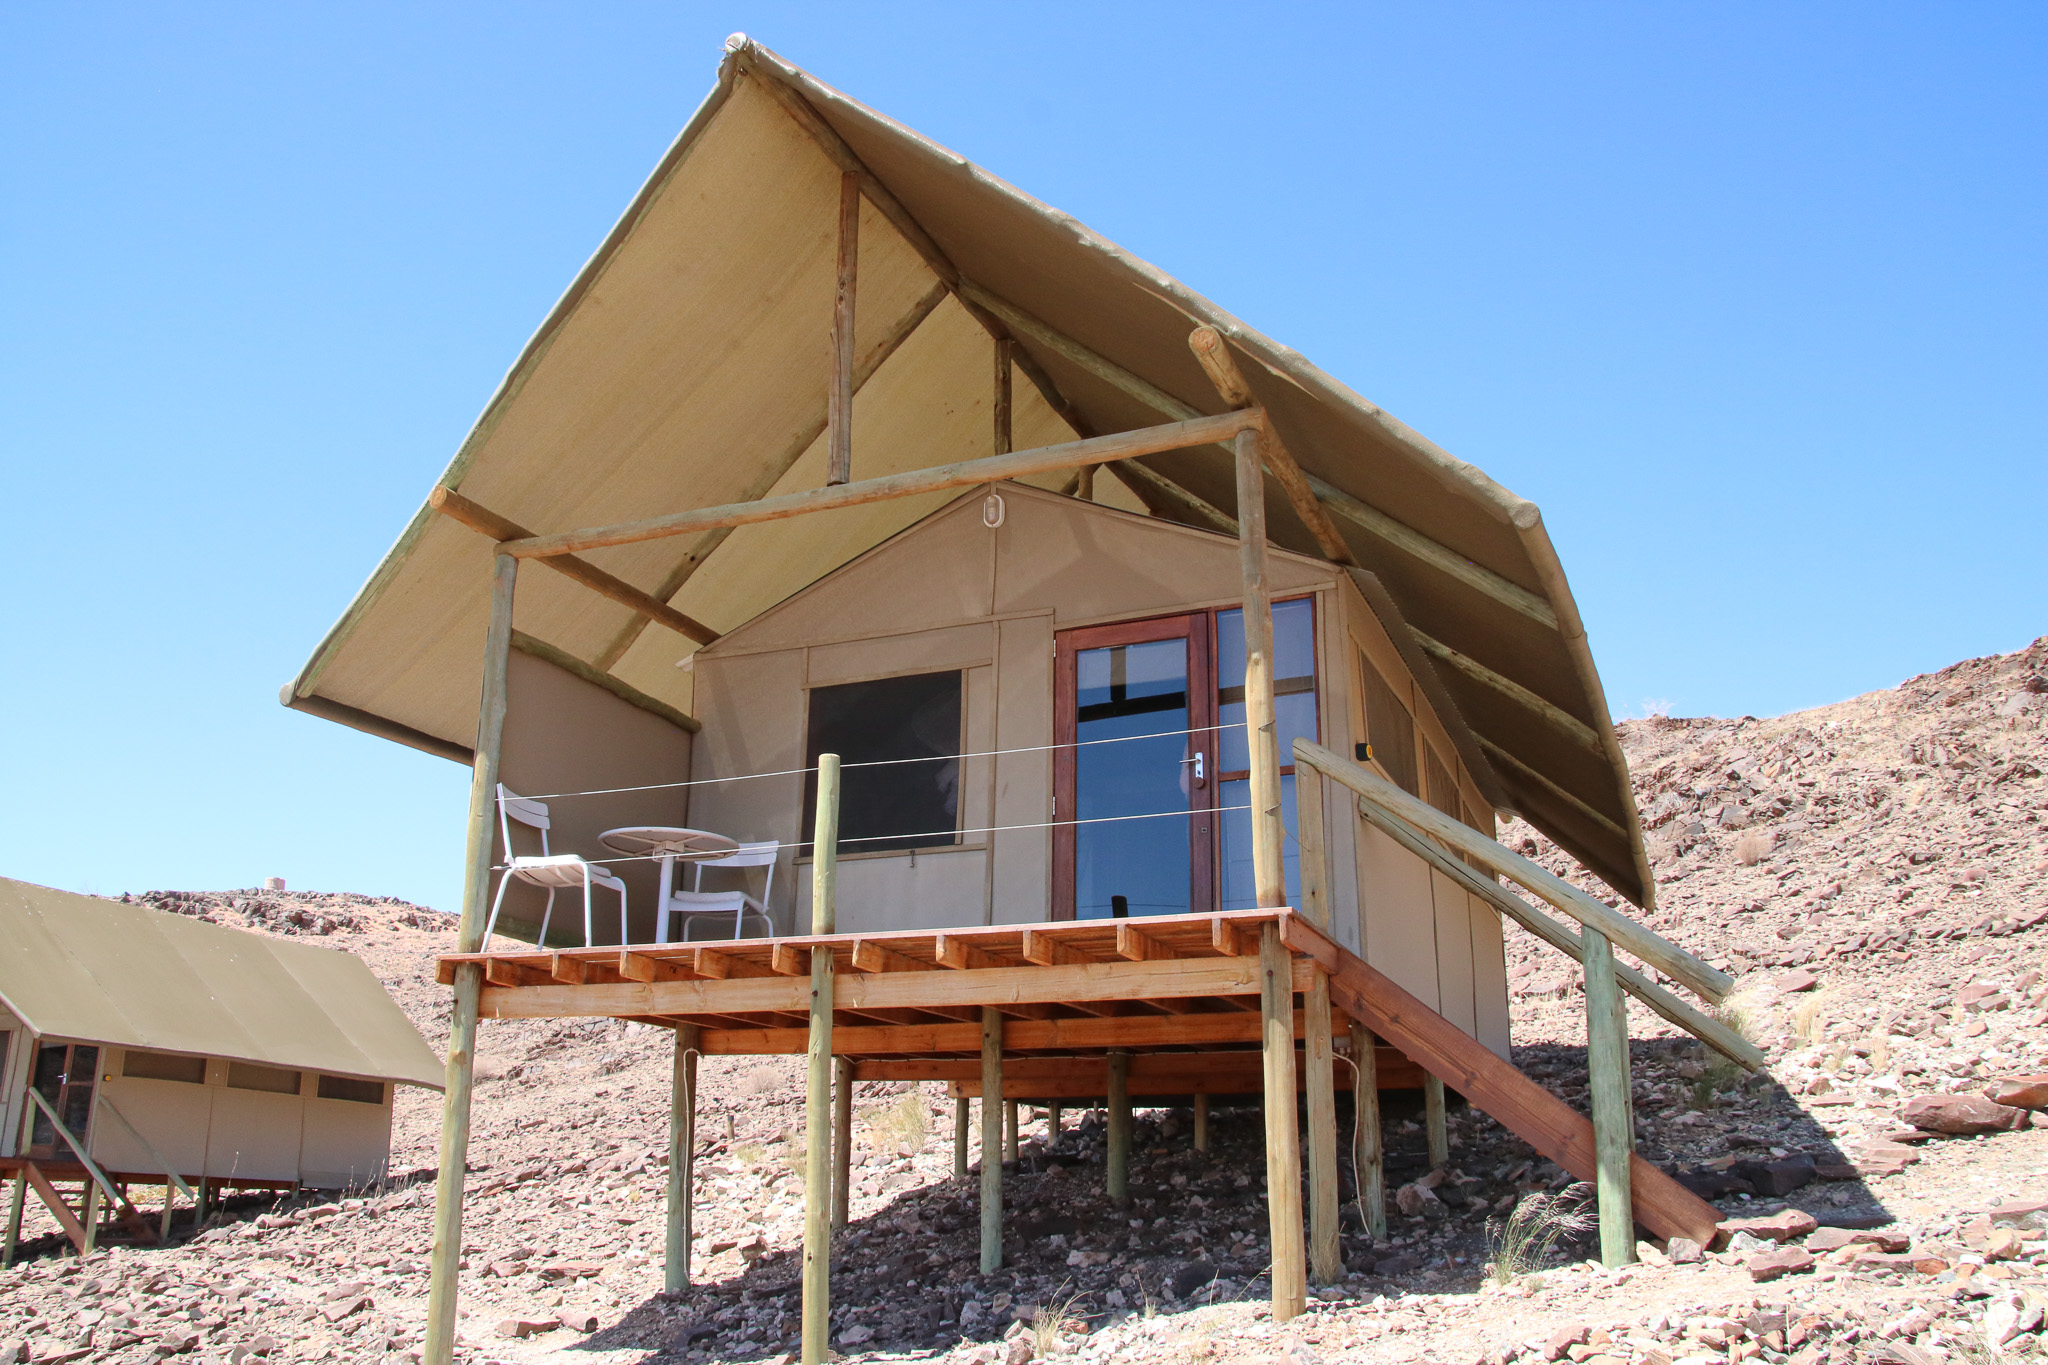 Lodges in Namibia